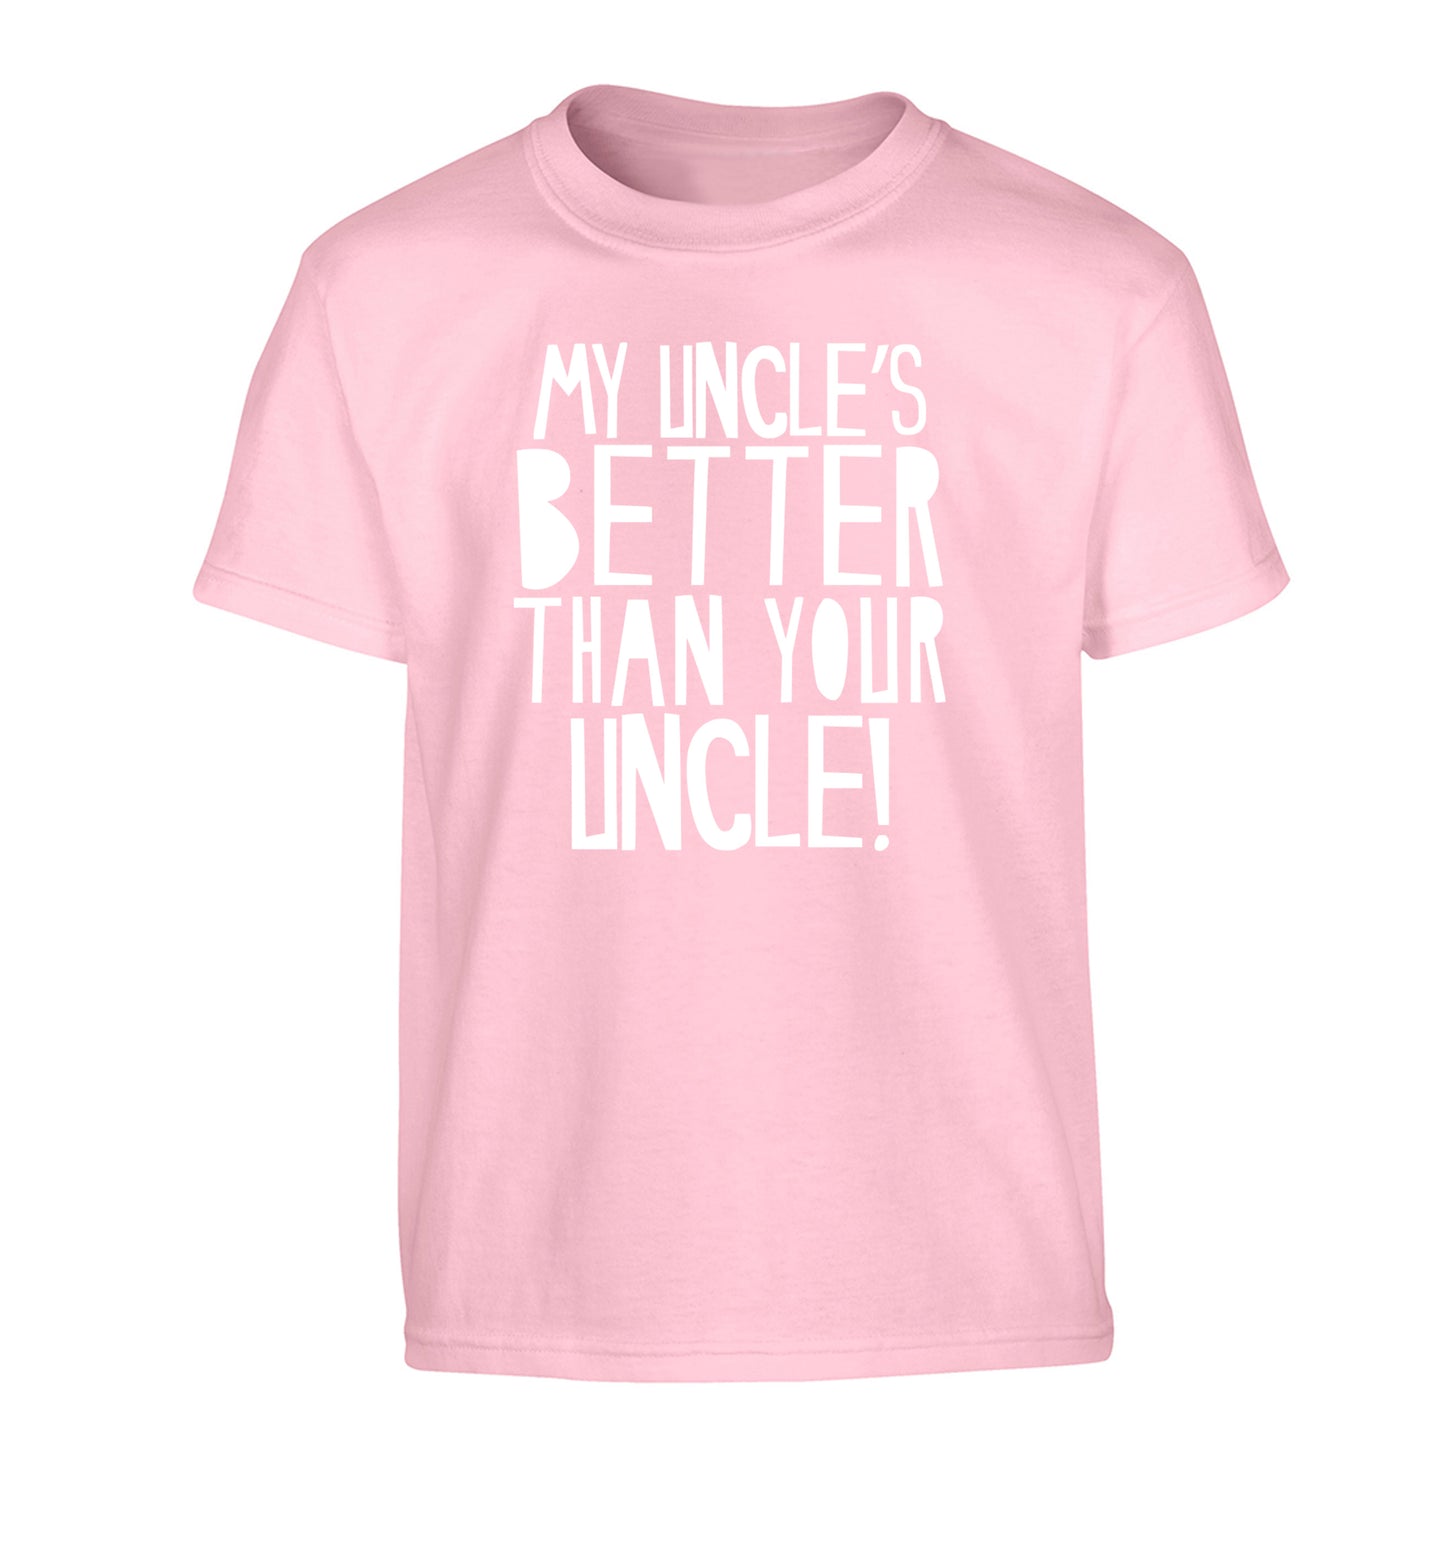 My uncles better than your uncle Children's light pink Tshirt 12-13 Years